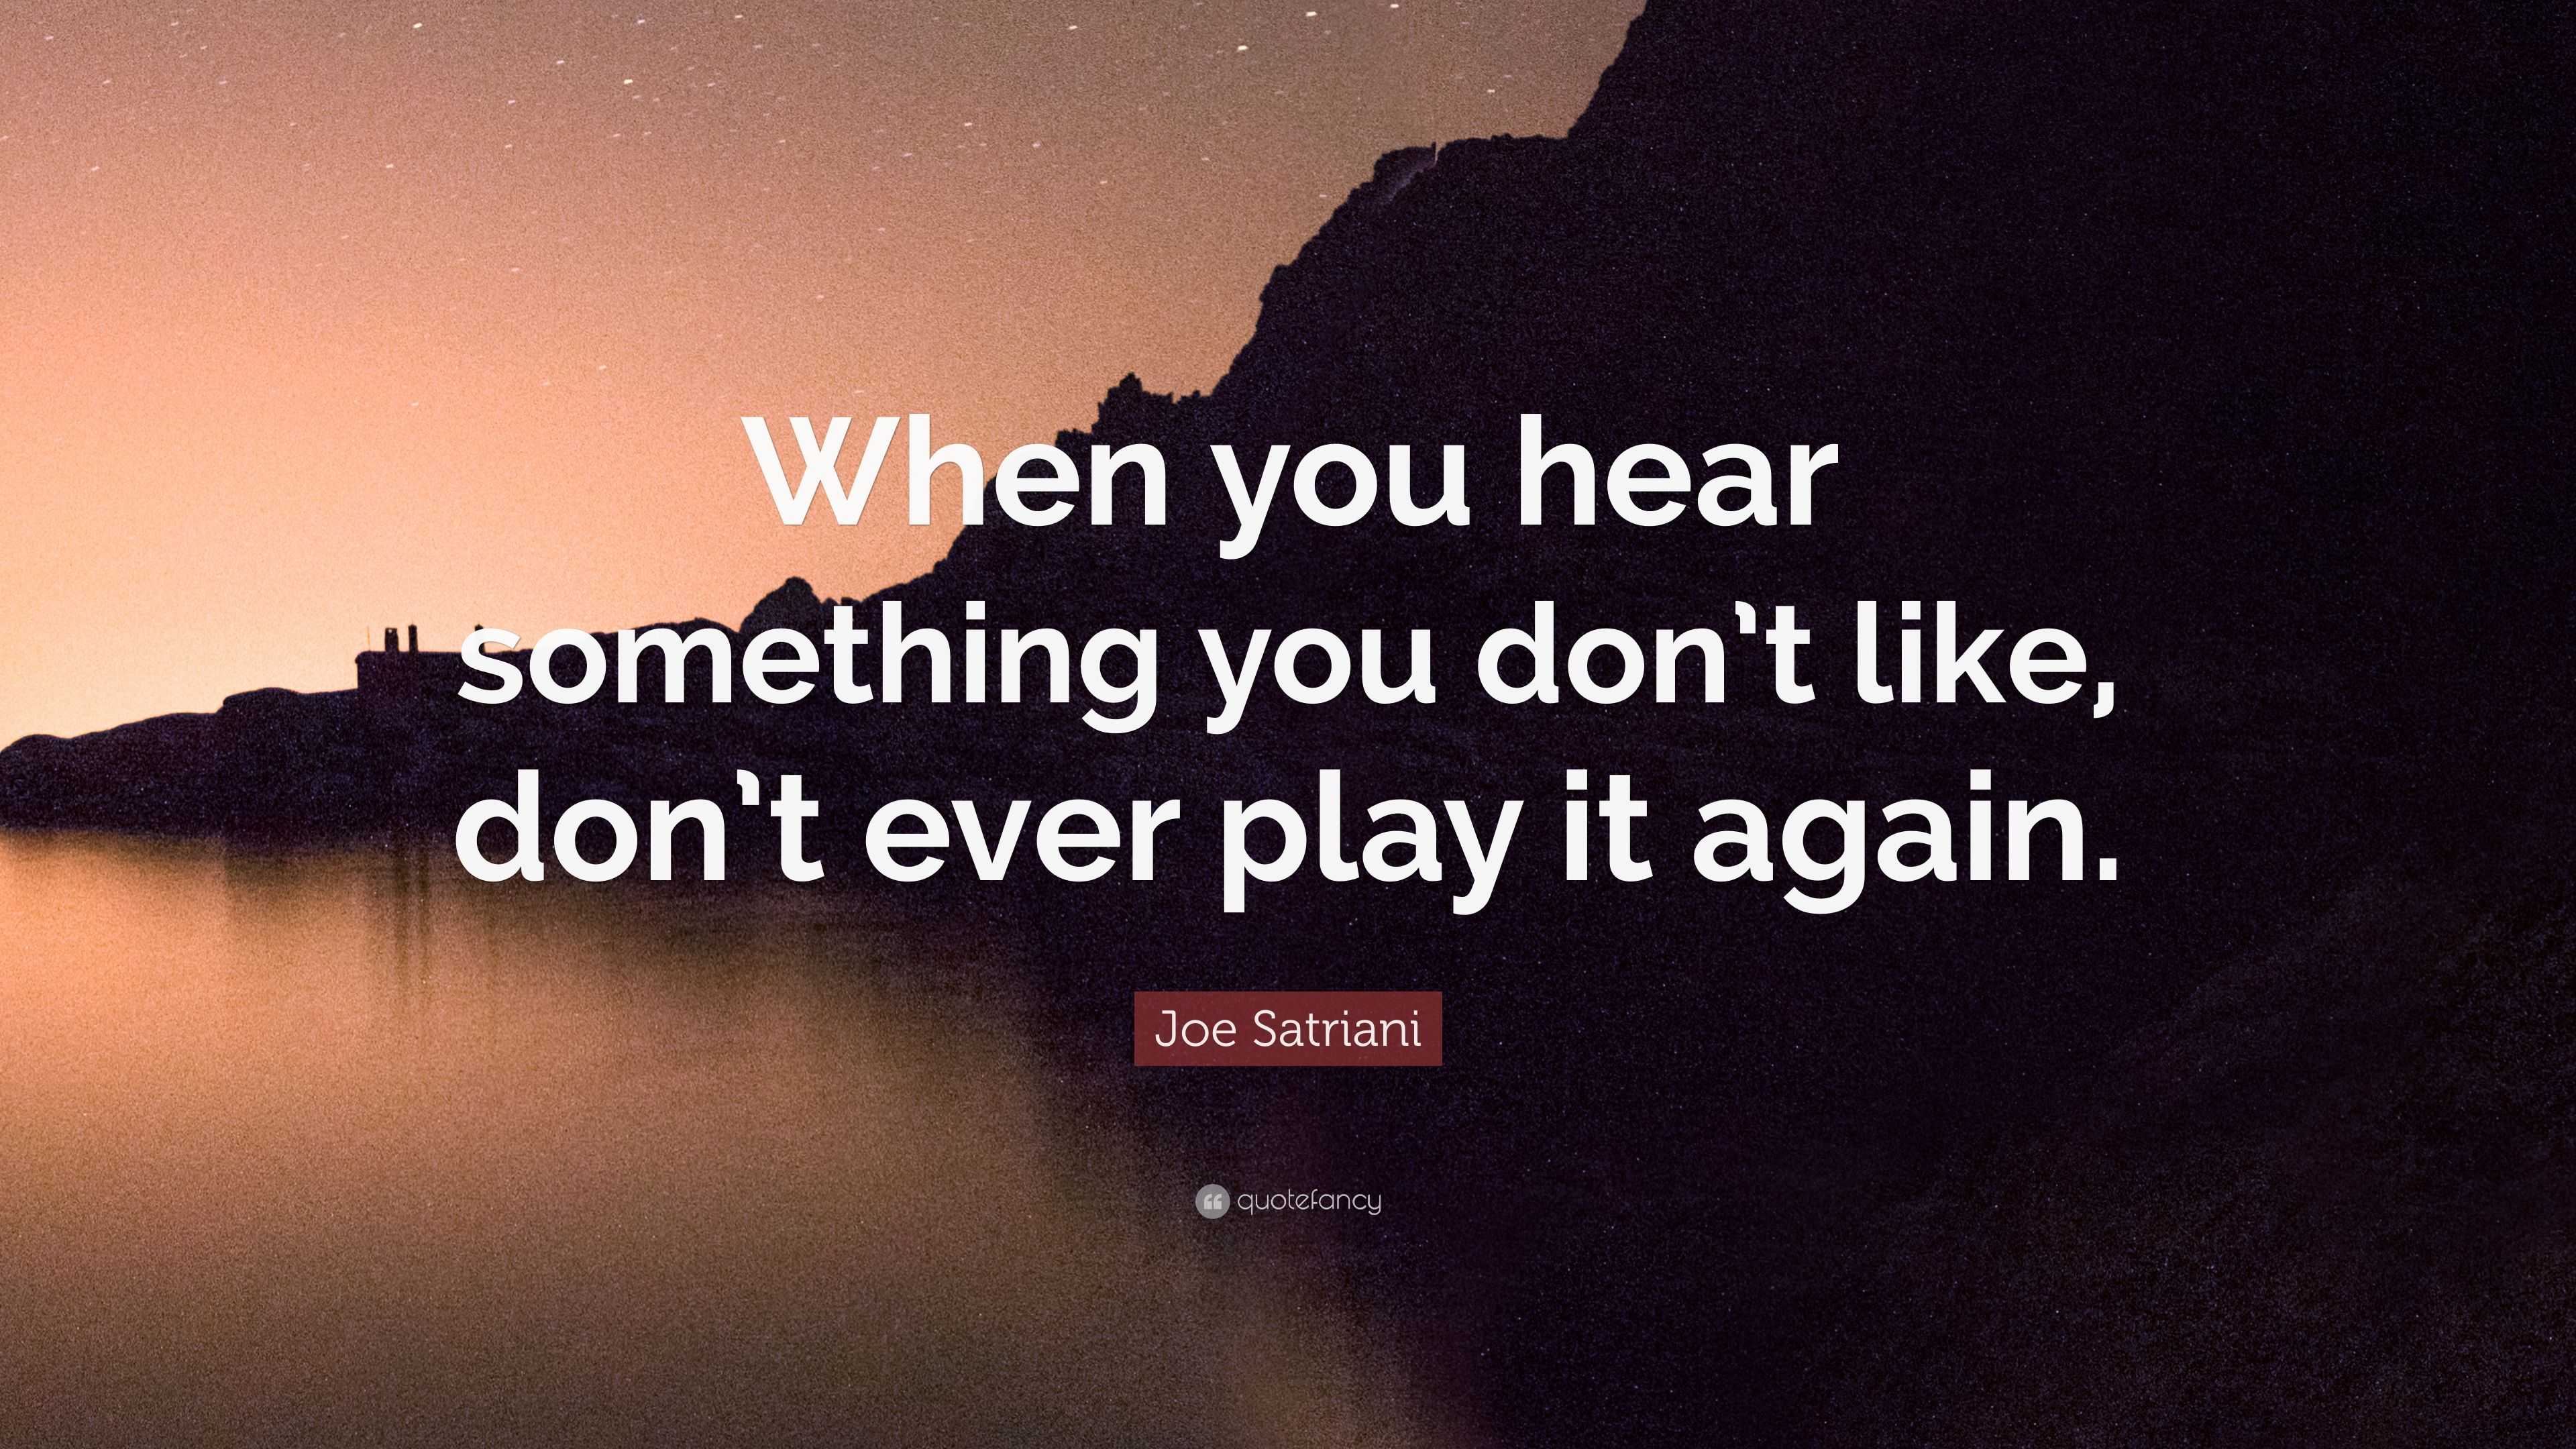 Joe Satriani Quote “When you hear something you don t like don